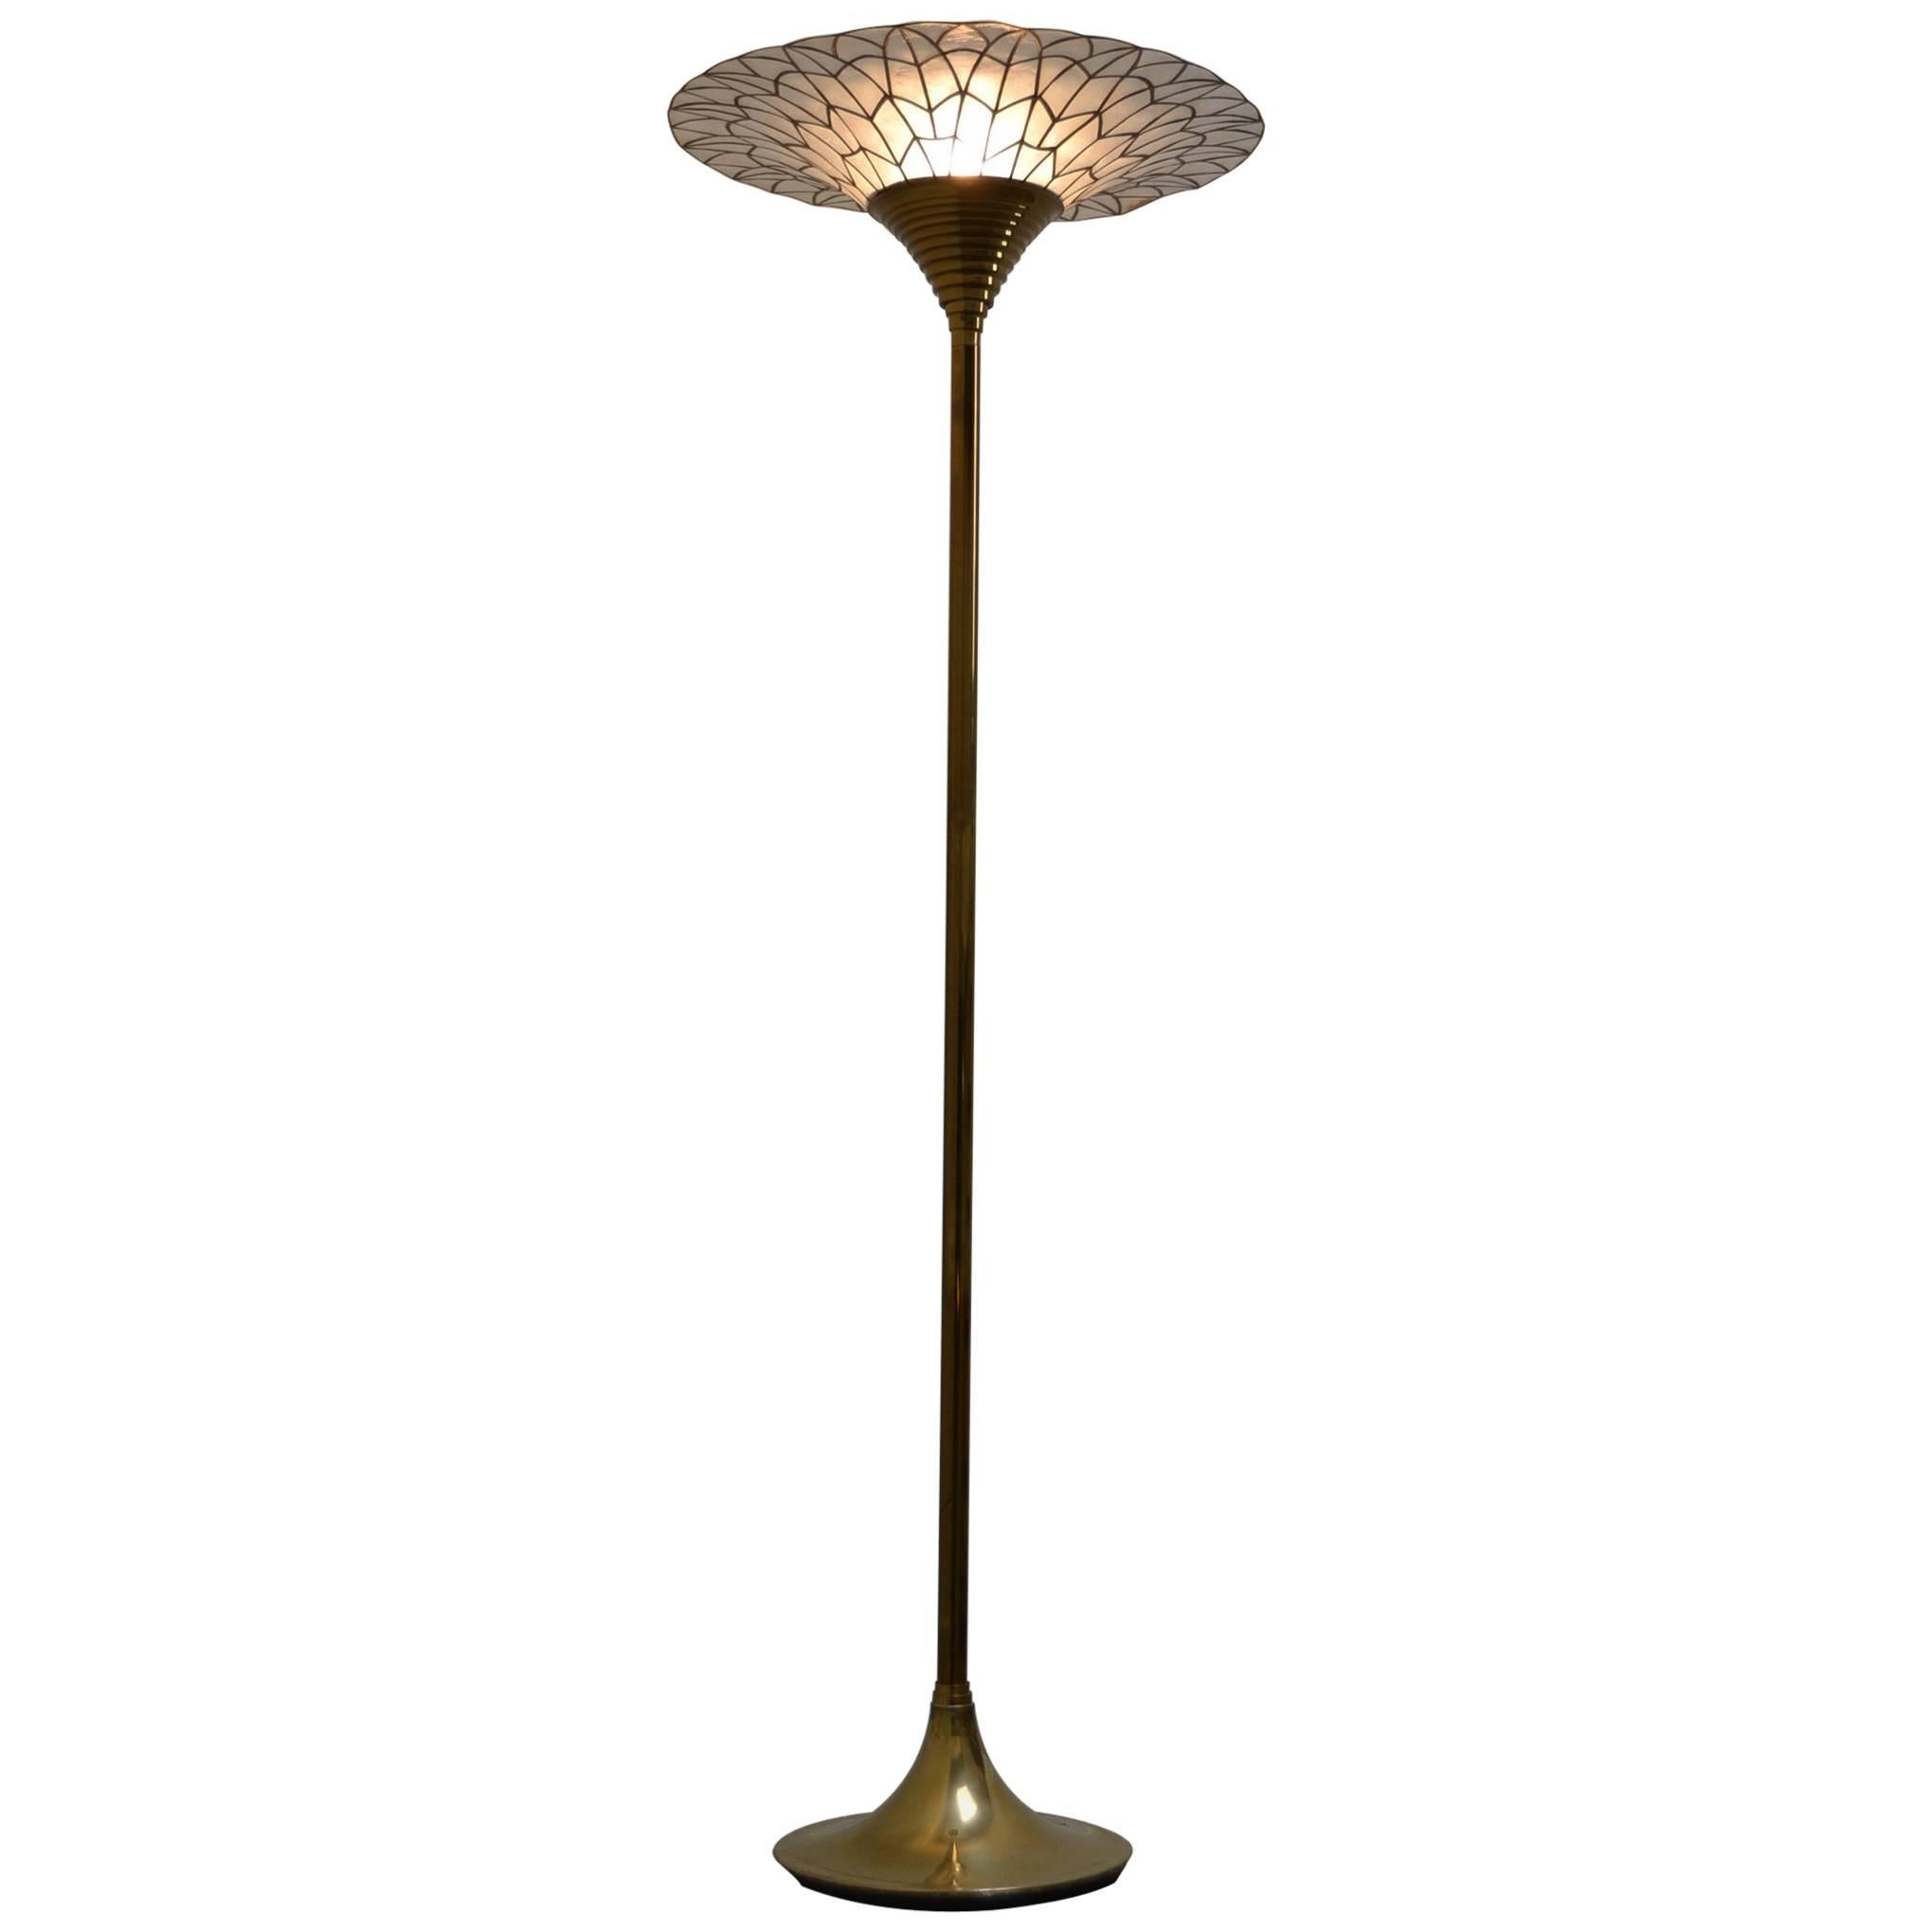 1960s Brass Torchiere Floor Lamp with Capiz Shell Trumpet Shade